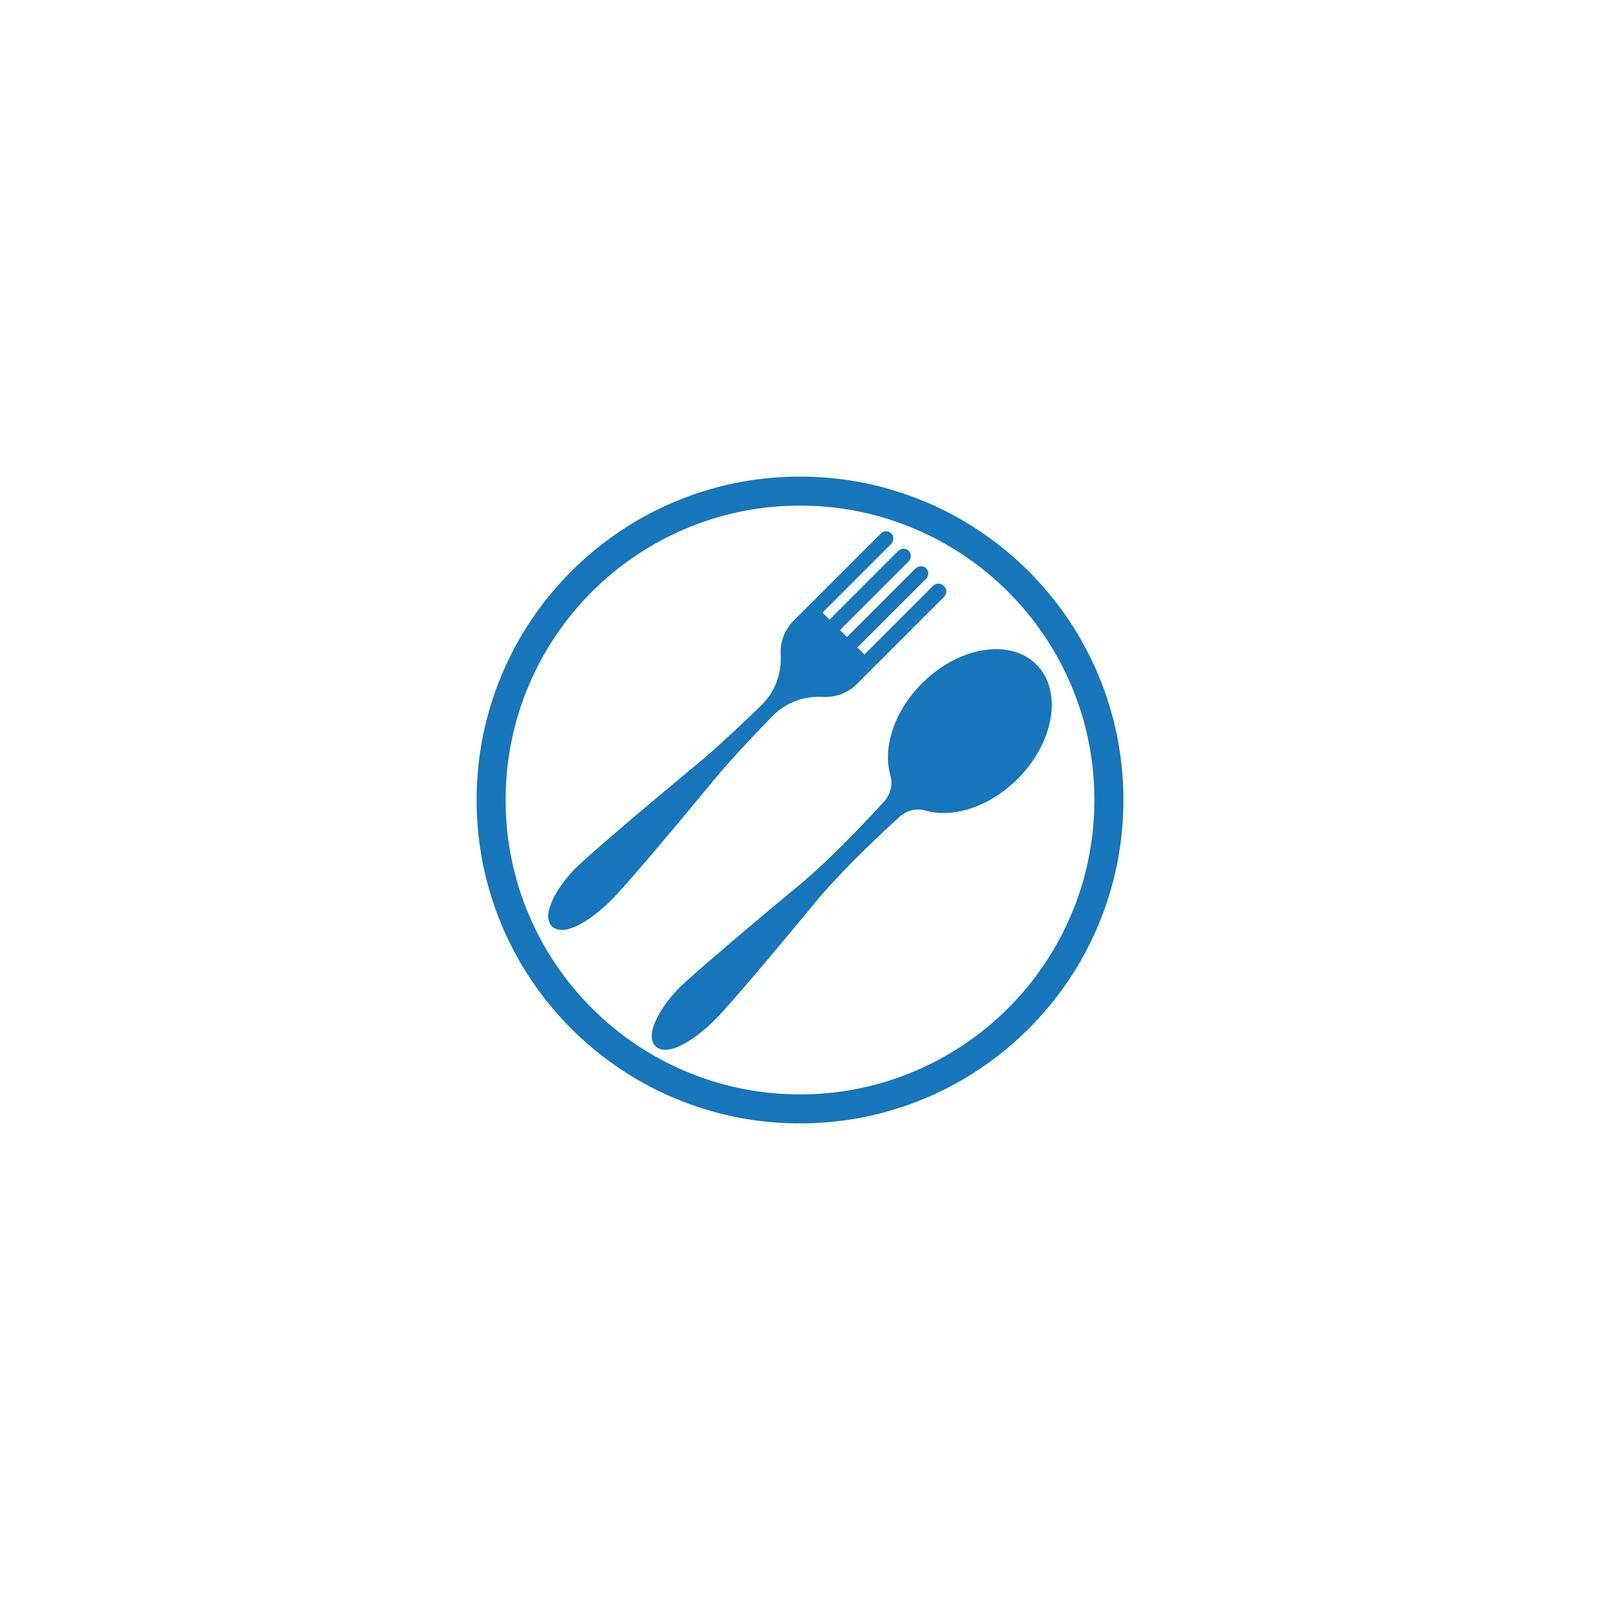 fork and spoon icon vector template